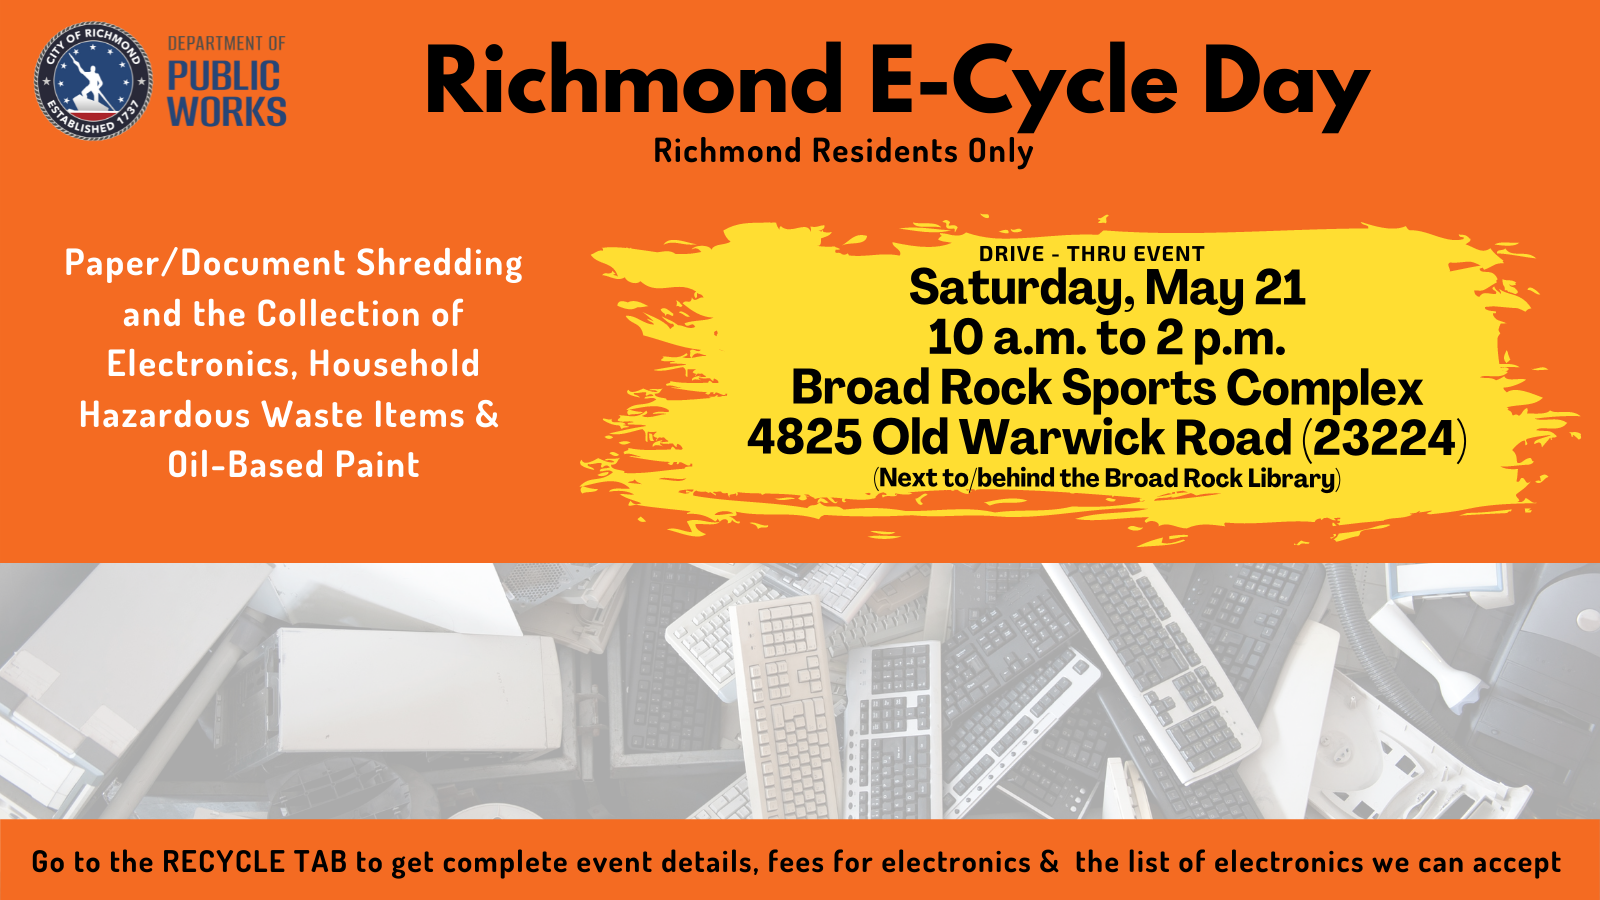 Richmond E-Cycle Day - May 21, 2022 at Broad Rock Sports Complex